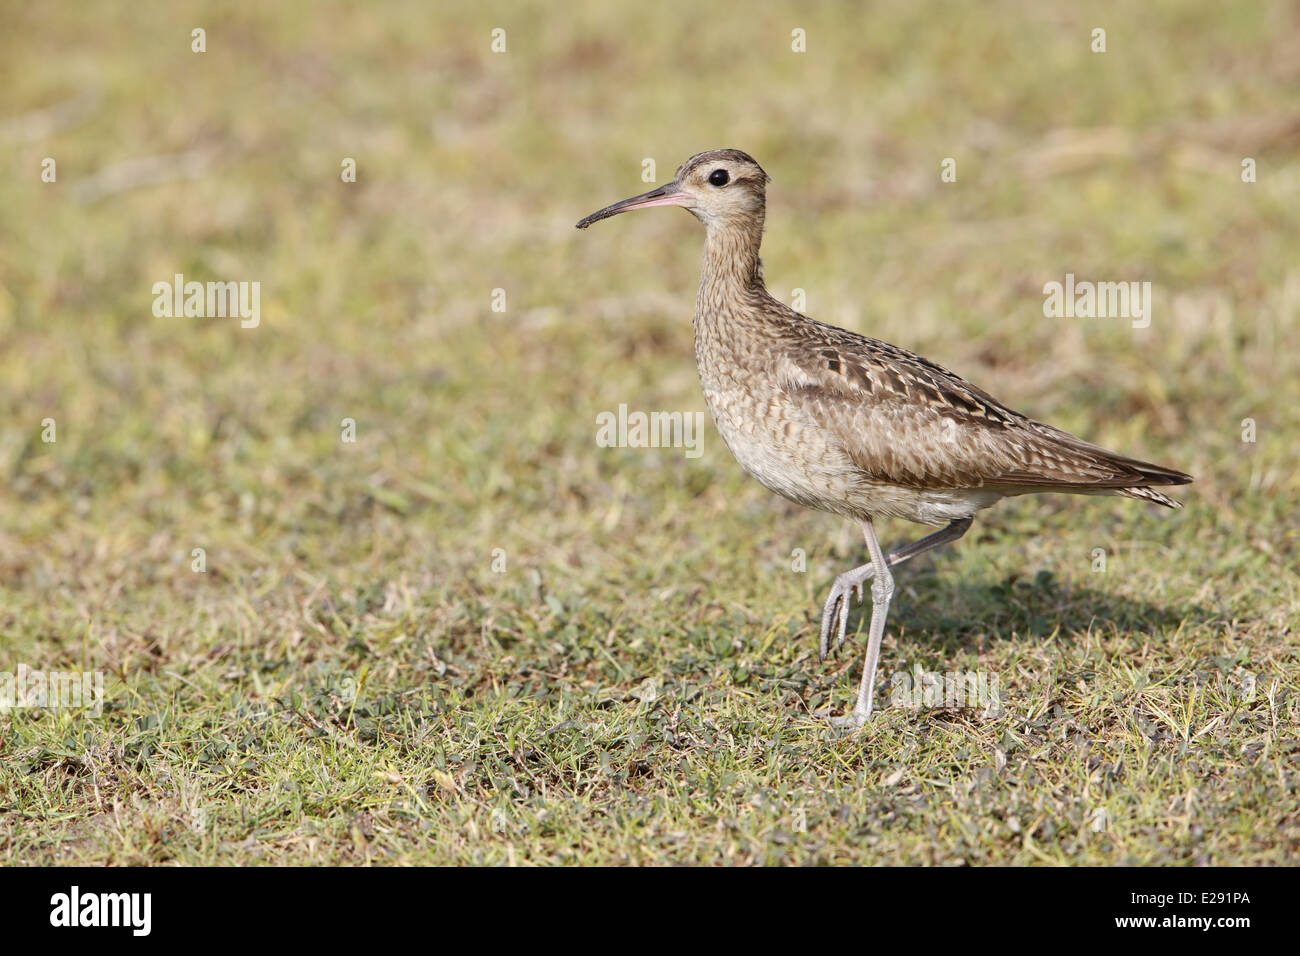 Little Whimbrel (Numenius minutus) adult, standing on grass, Hong Kong, China, December Stock Photo